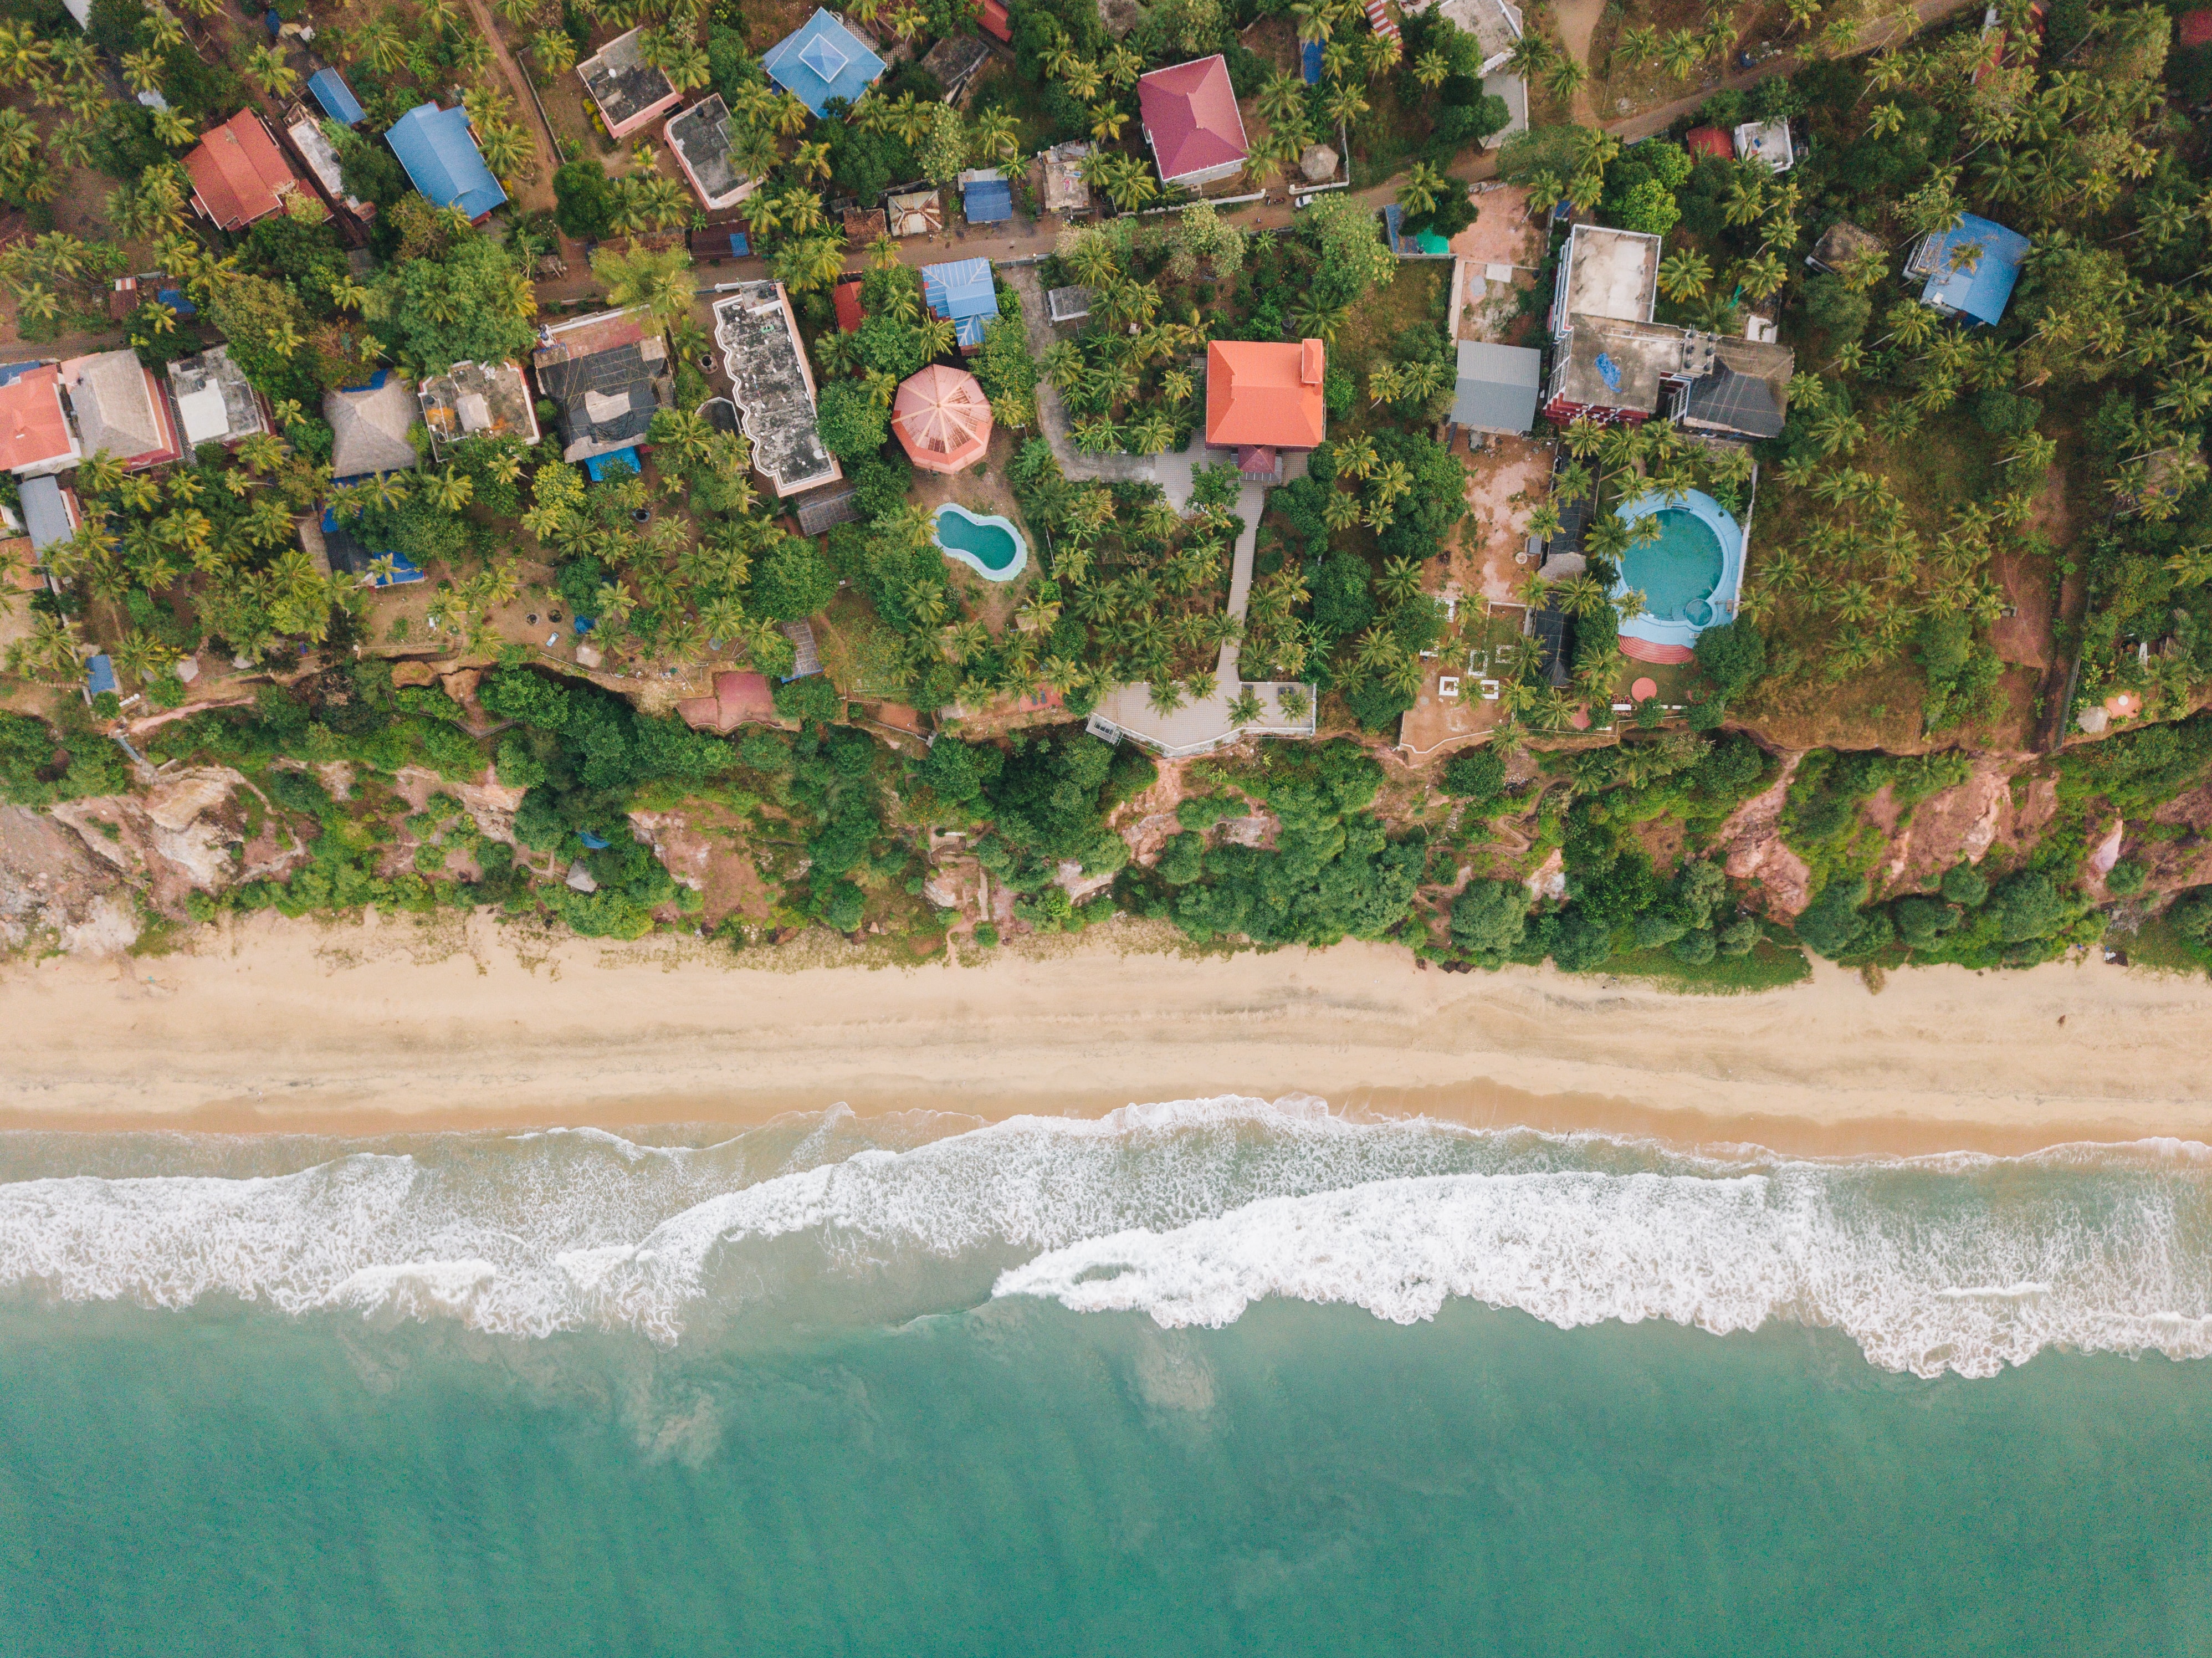 shore, view from above, nature, beach, palms, building, bank wallpaper for mobile